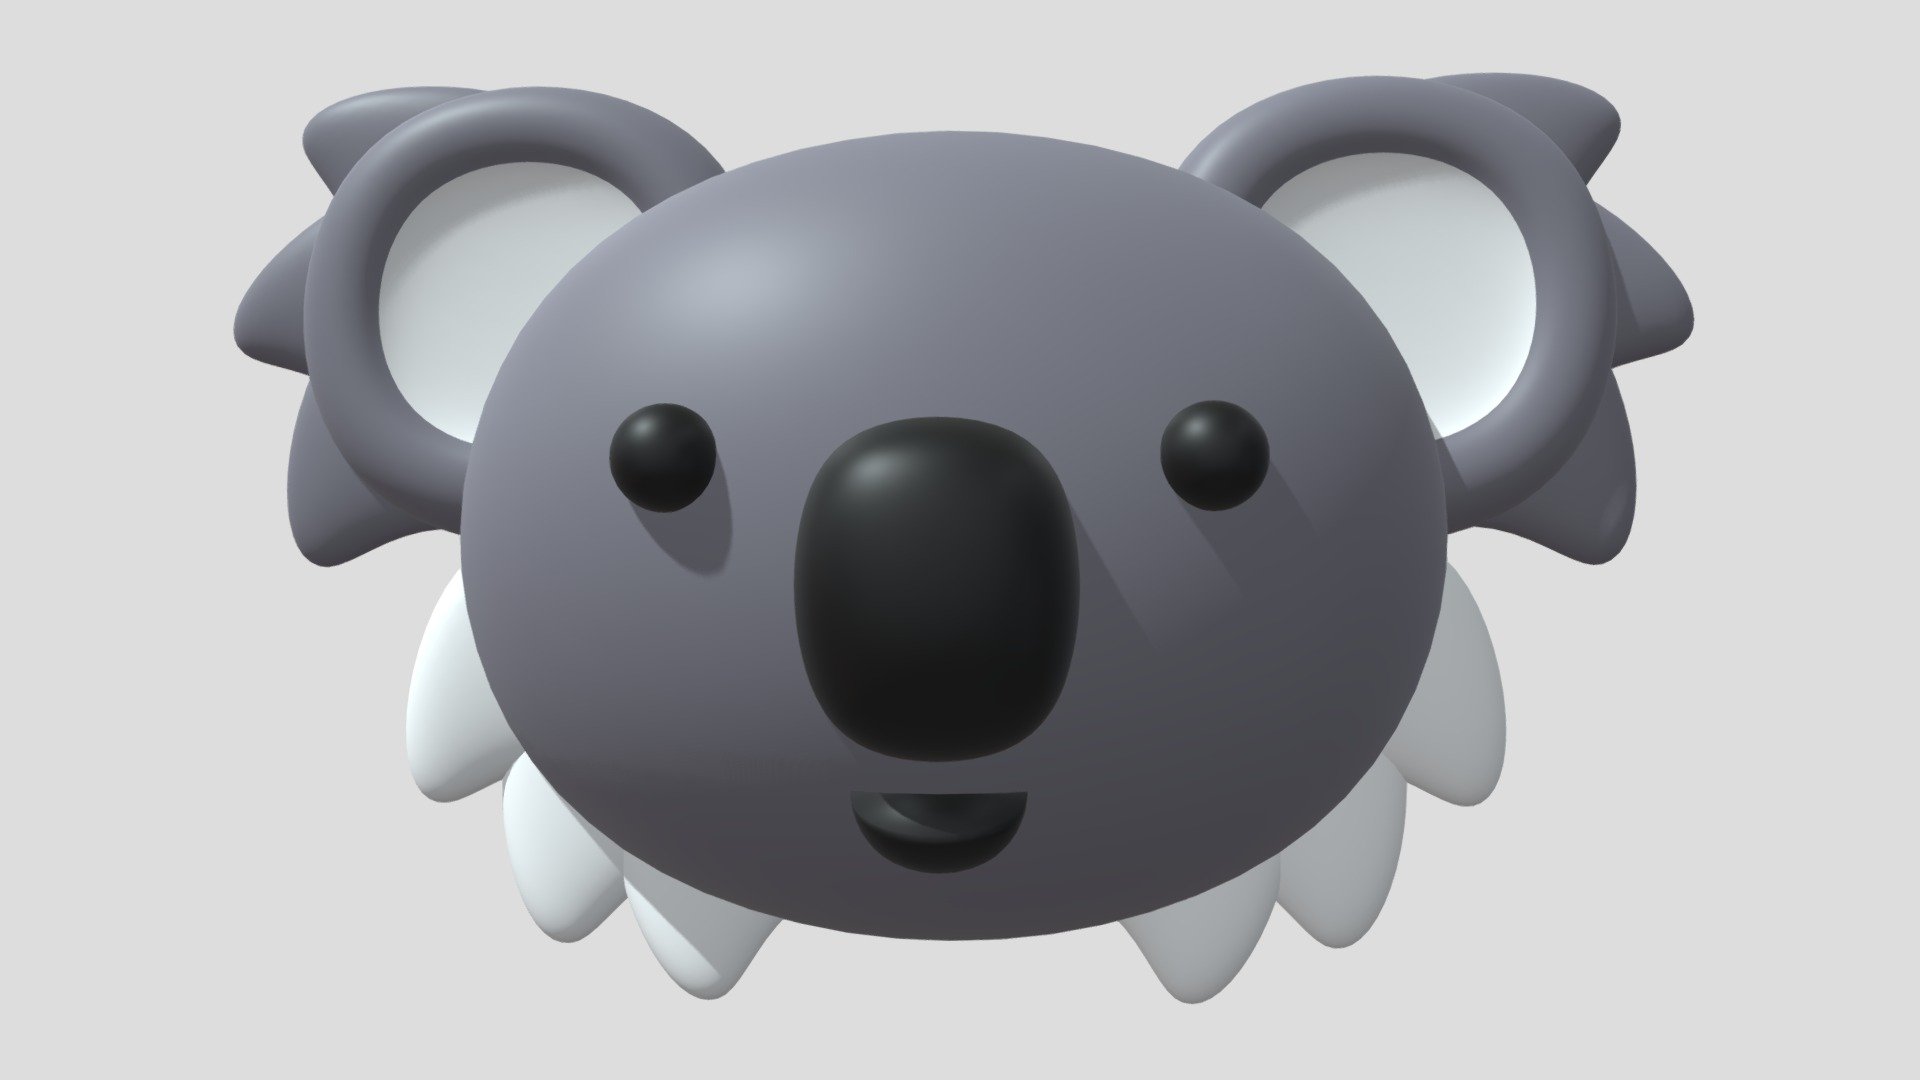 -Cartoon Cute Koala Head.

-This product contains 19 objects.

-Total vert: 16,041 , poly: 15,885.

-Materials have the correct names.

-This product was created in Blender 3.0.

-Formats: blend, fbx, obj, c4d, dae, abc, stl, glb, unity.

-We hope you enjoy this model.

-Thank you 3d model